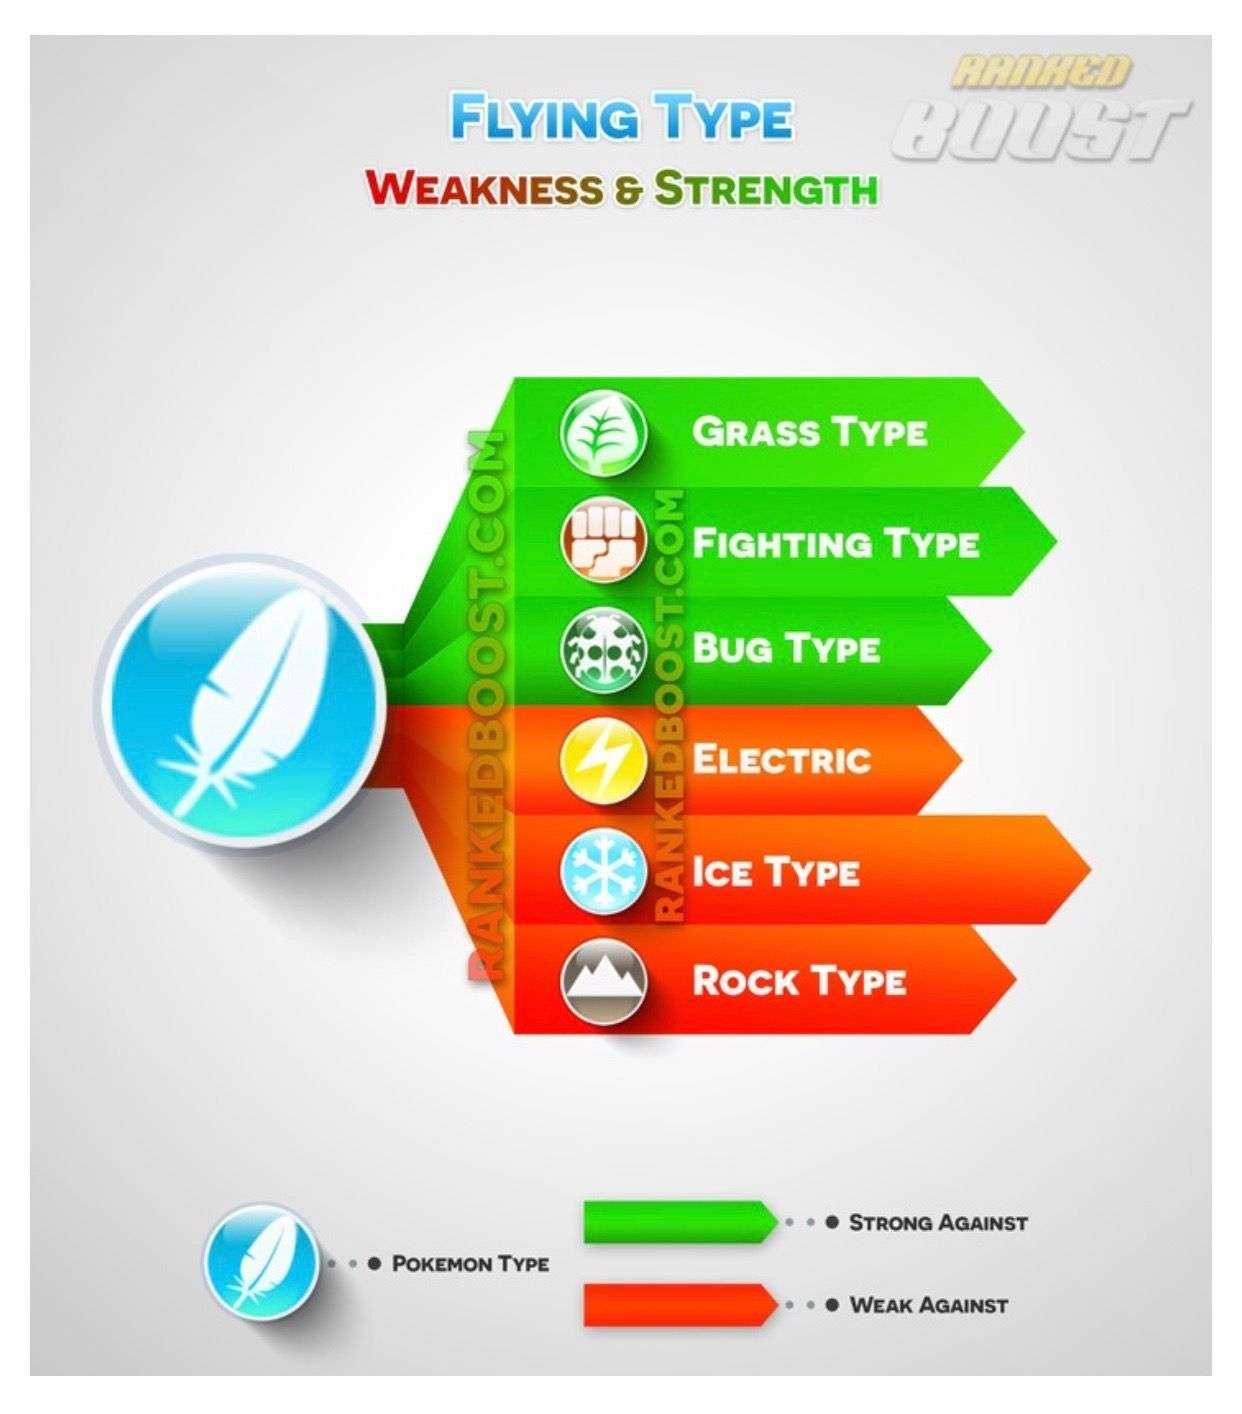 FLYING strengths and weaknesses